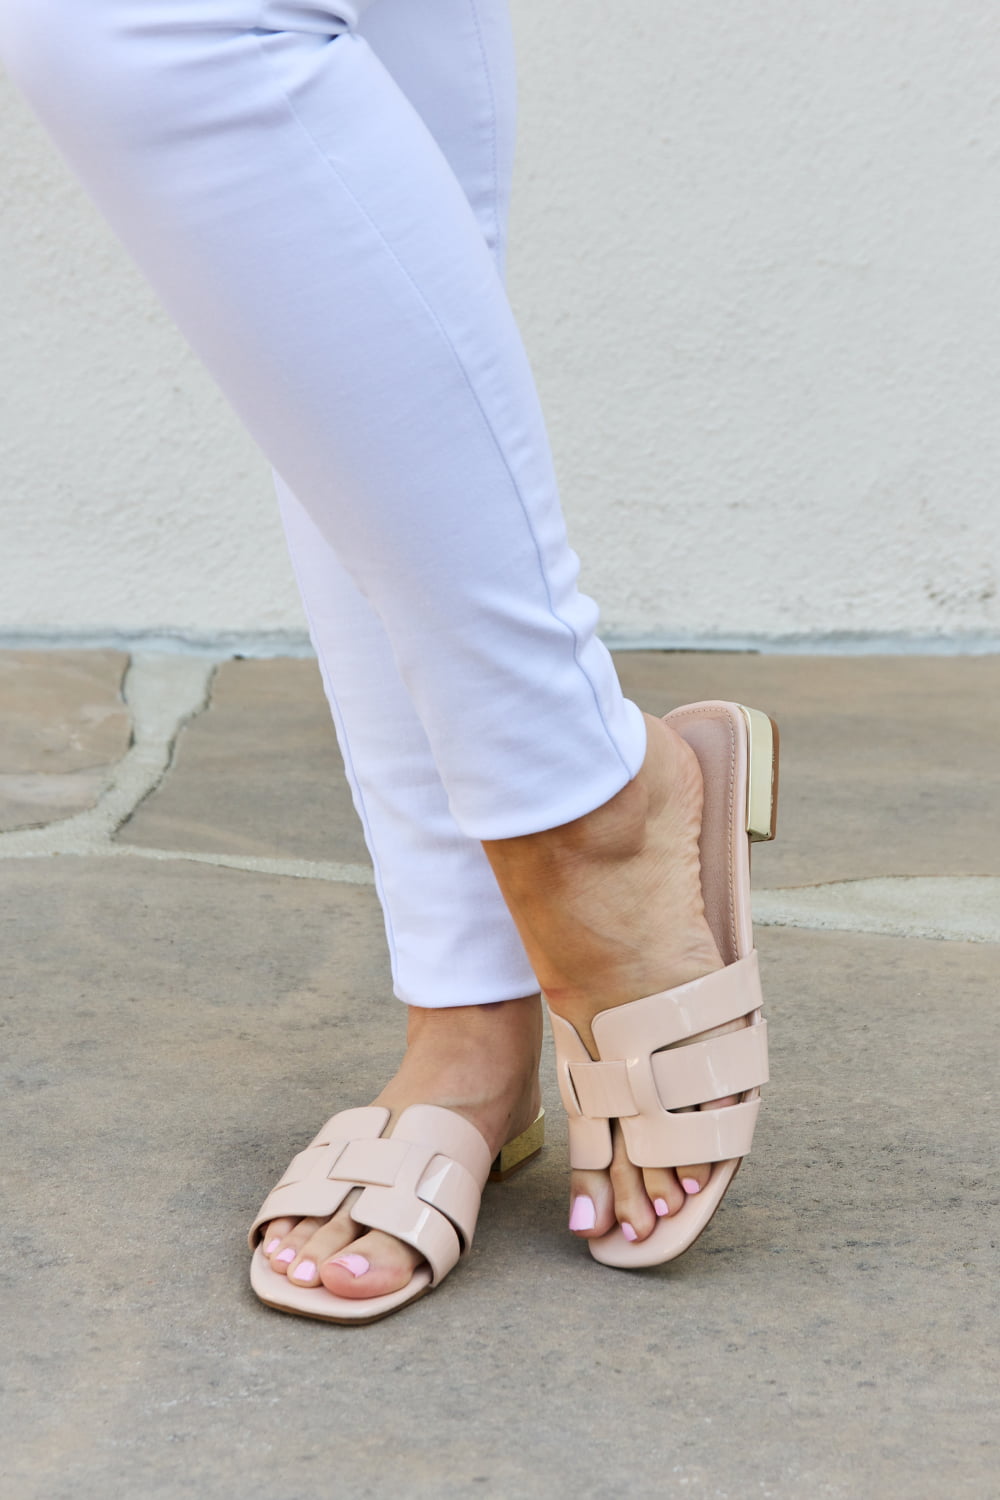 Weeboo Walk It Out Slide Sandals in Nude - Fashion Girl Online Store